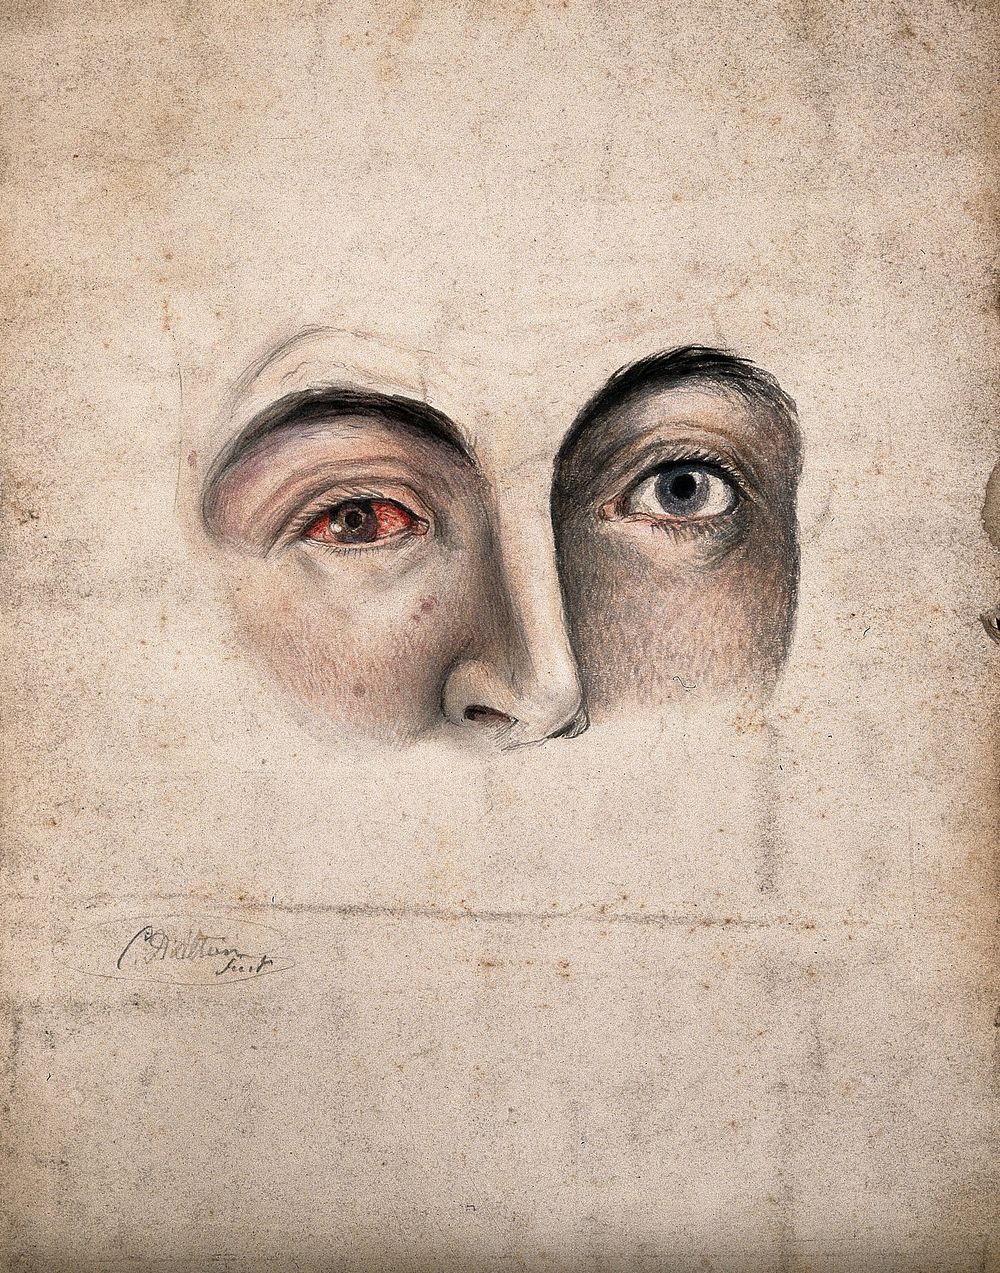 A section of a face (eyes and nose) with a disease affecting one eye. Watercolour by Christopher D' Alton.